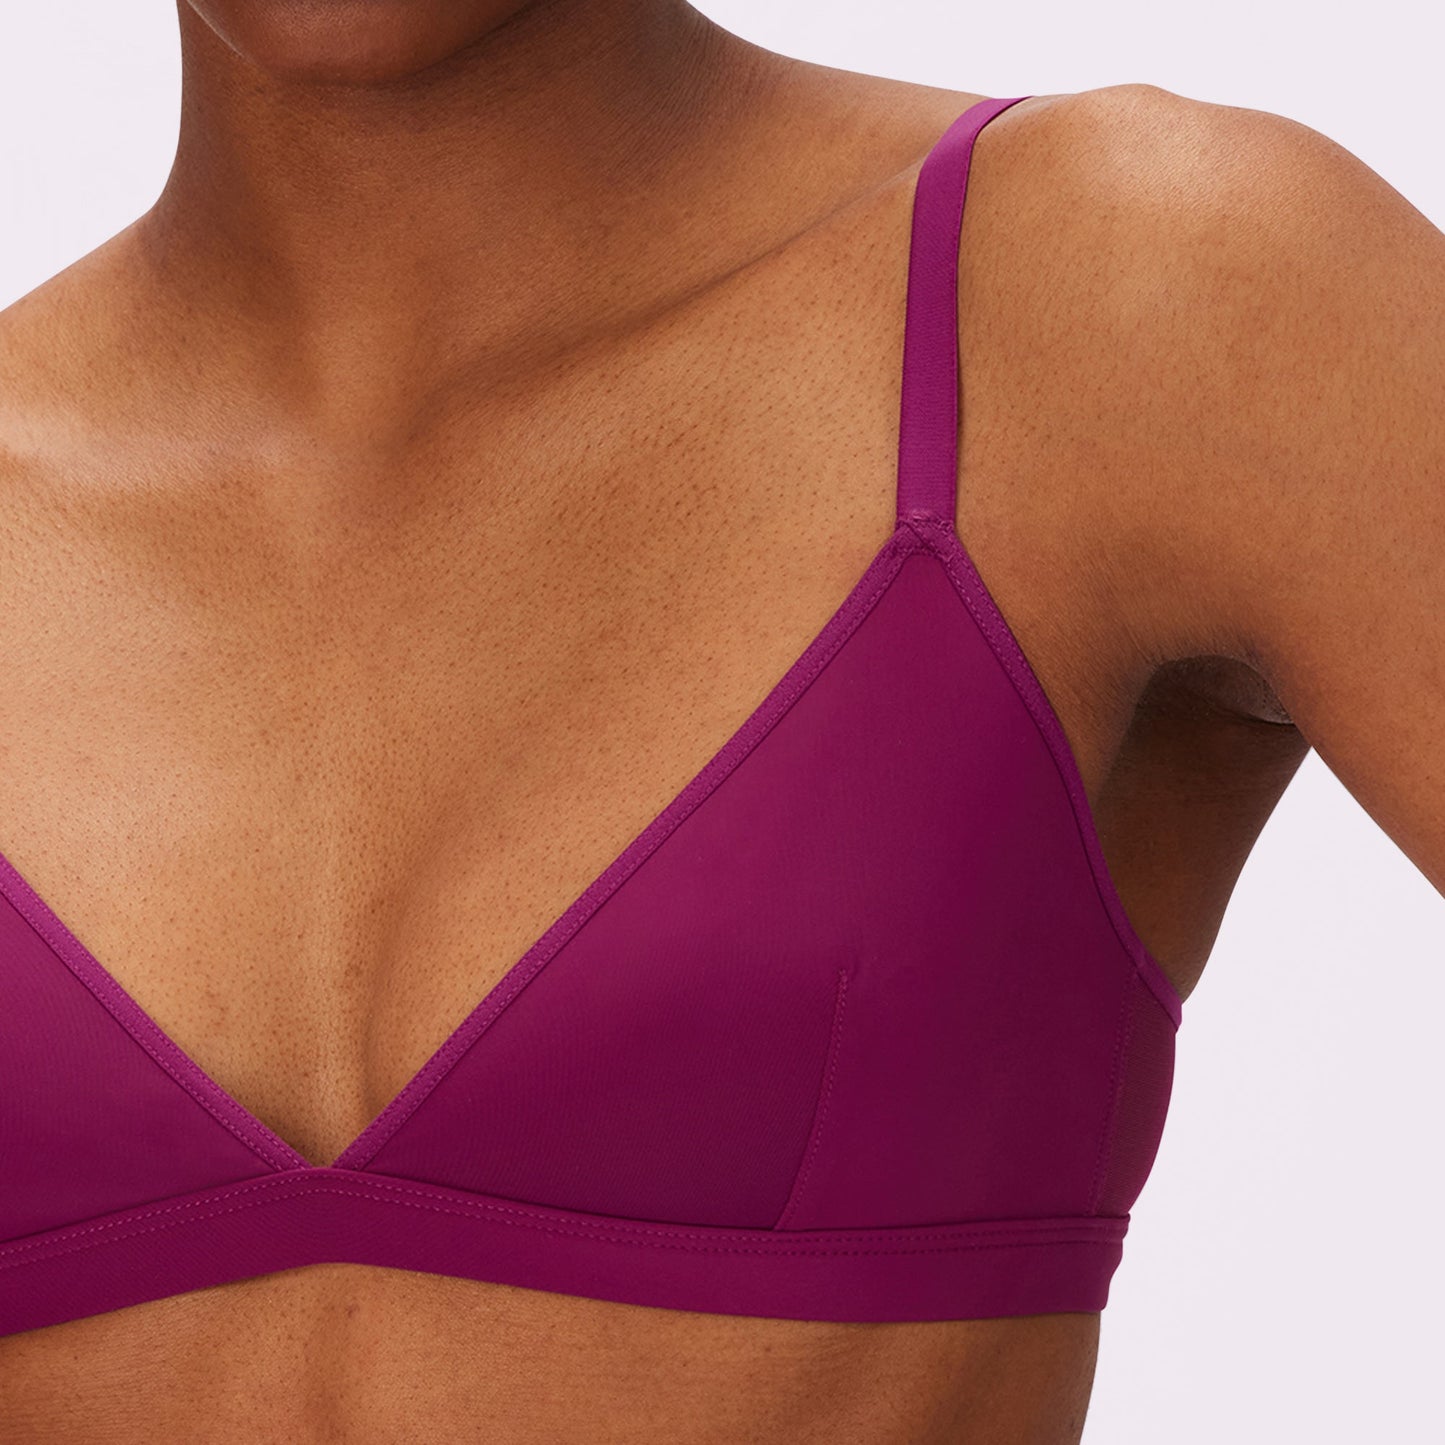 Where to Find the Size on Your Lululemon Sports Bra - Playbite